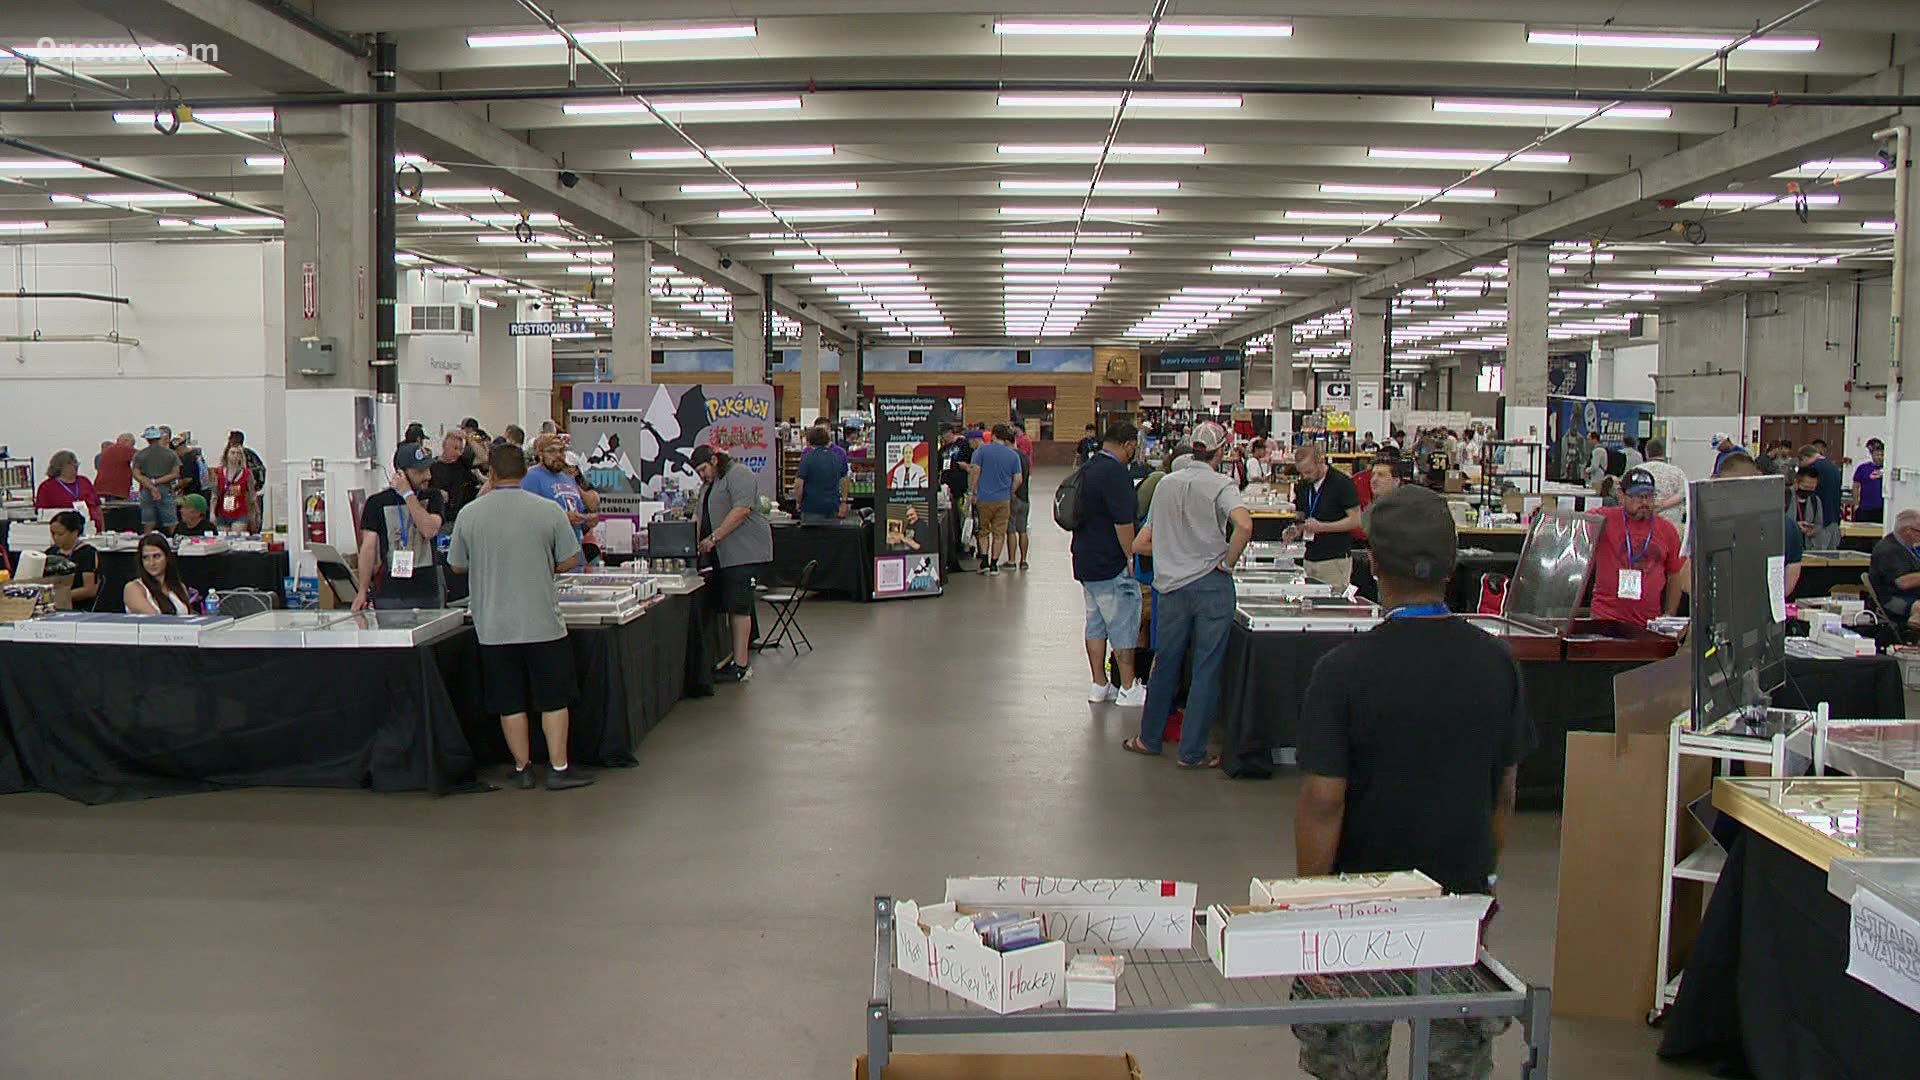 Denver hosts its biggest sports card show in decades